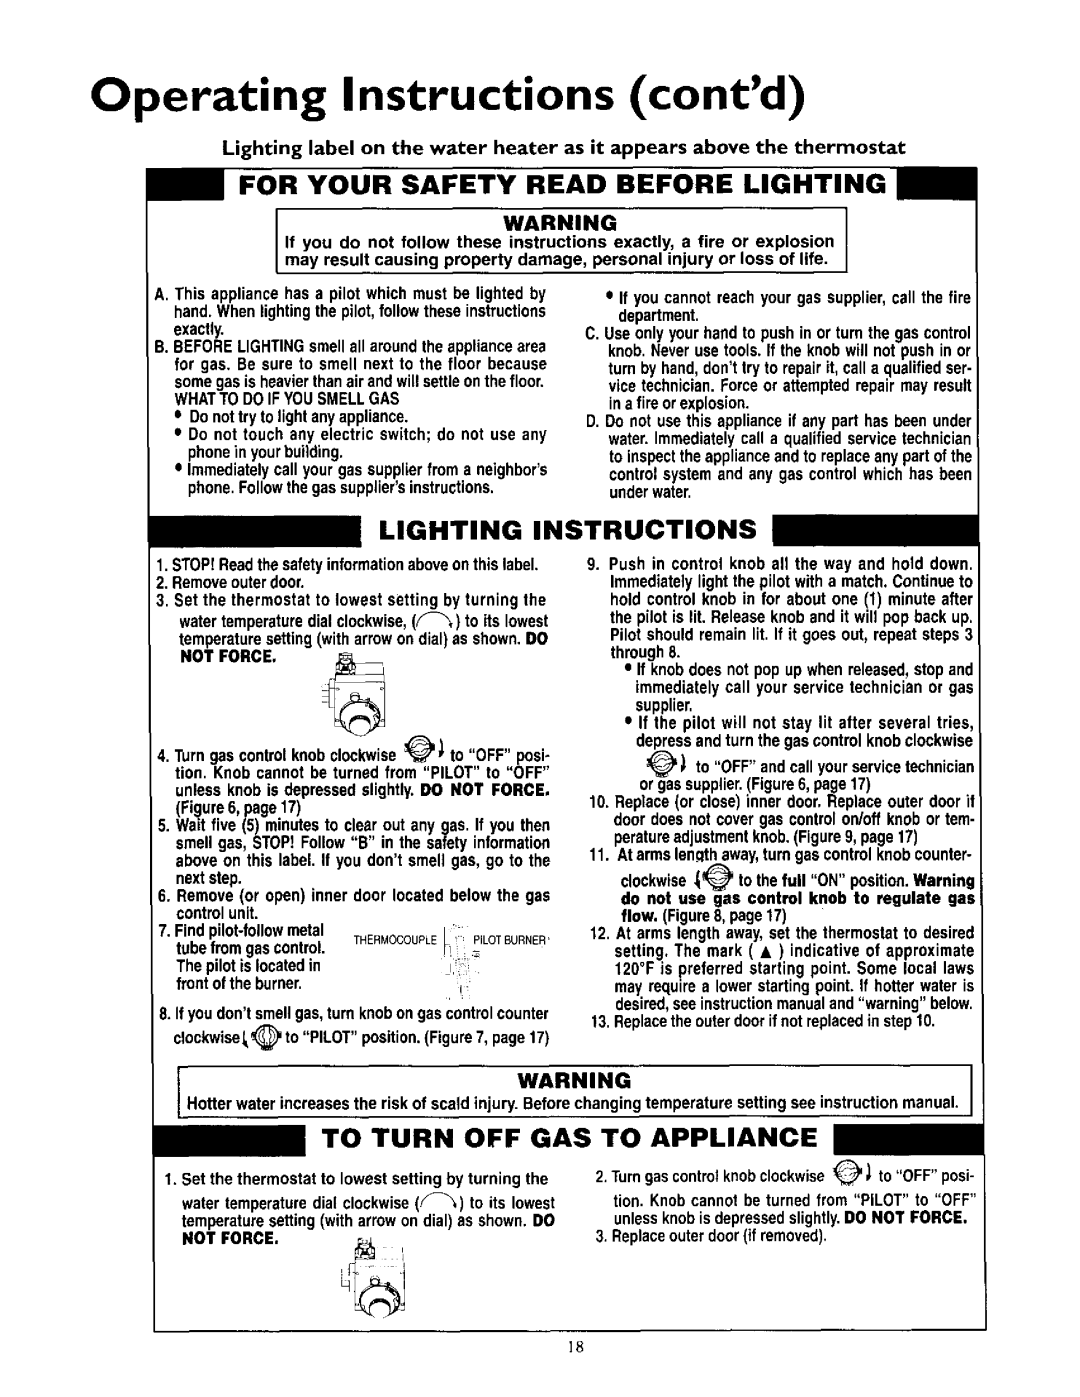 Kenmore 153.332161 Operating Instructions contd, For Your Safety Read Before Lig, Lighting Instructions, To Turn Off Gas 